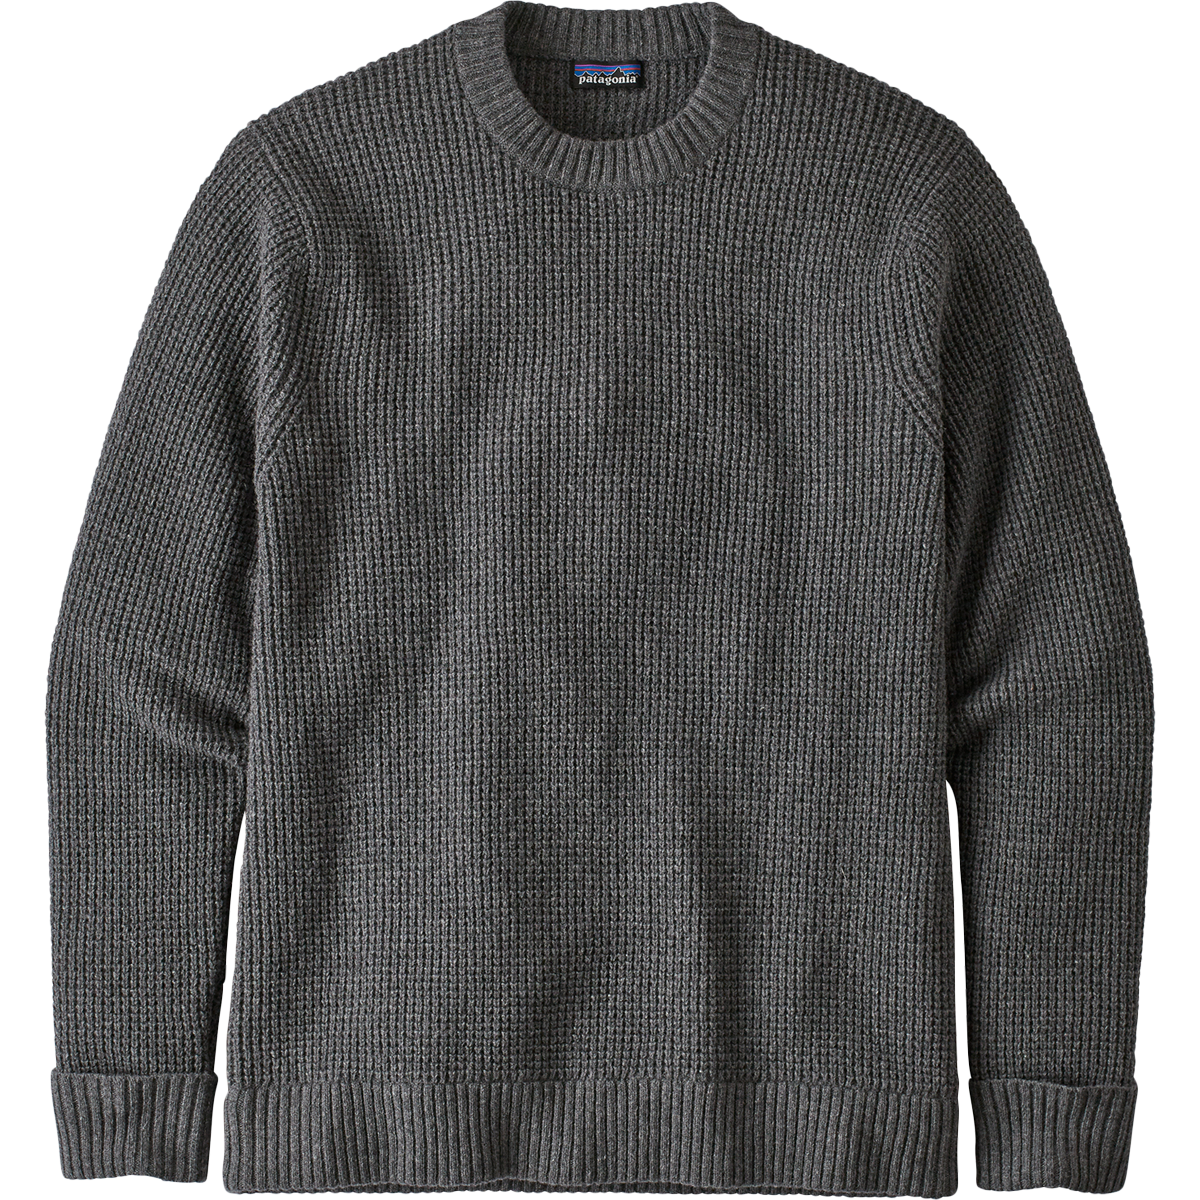 Men's Recycled Wool-Blend Sweater alternate view